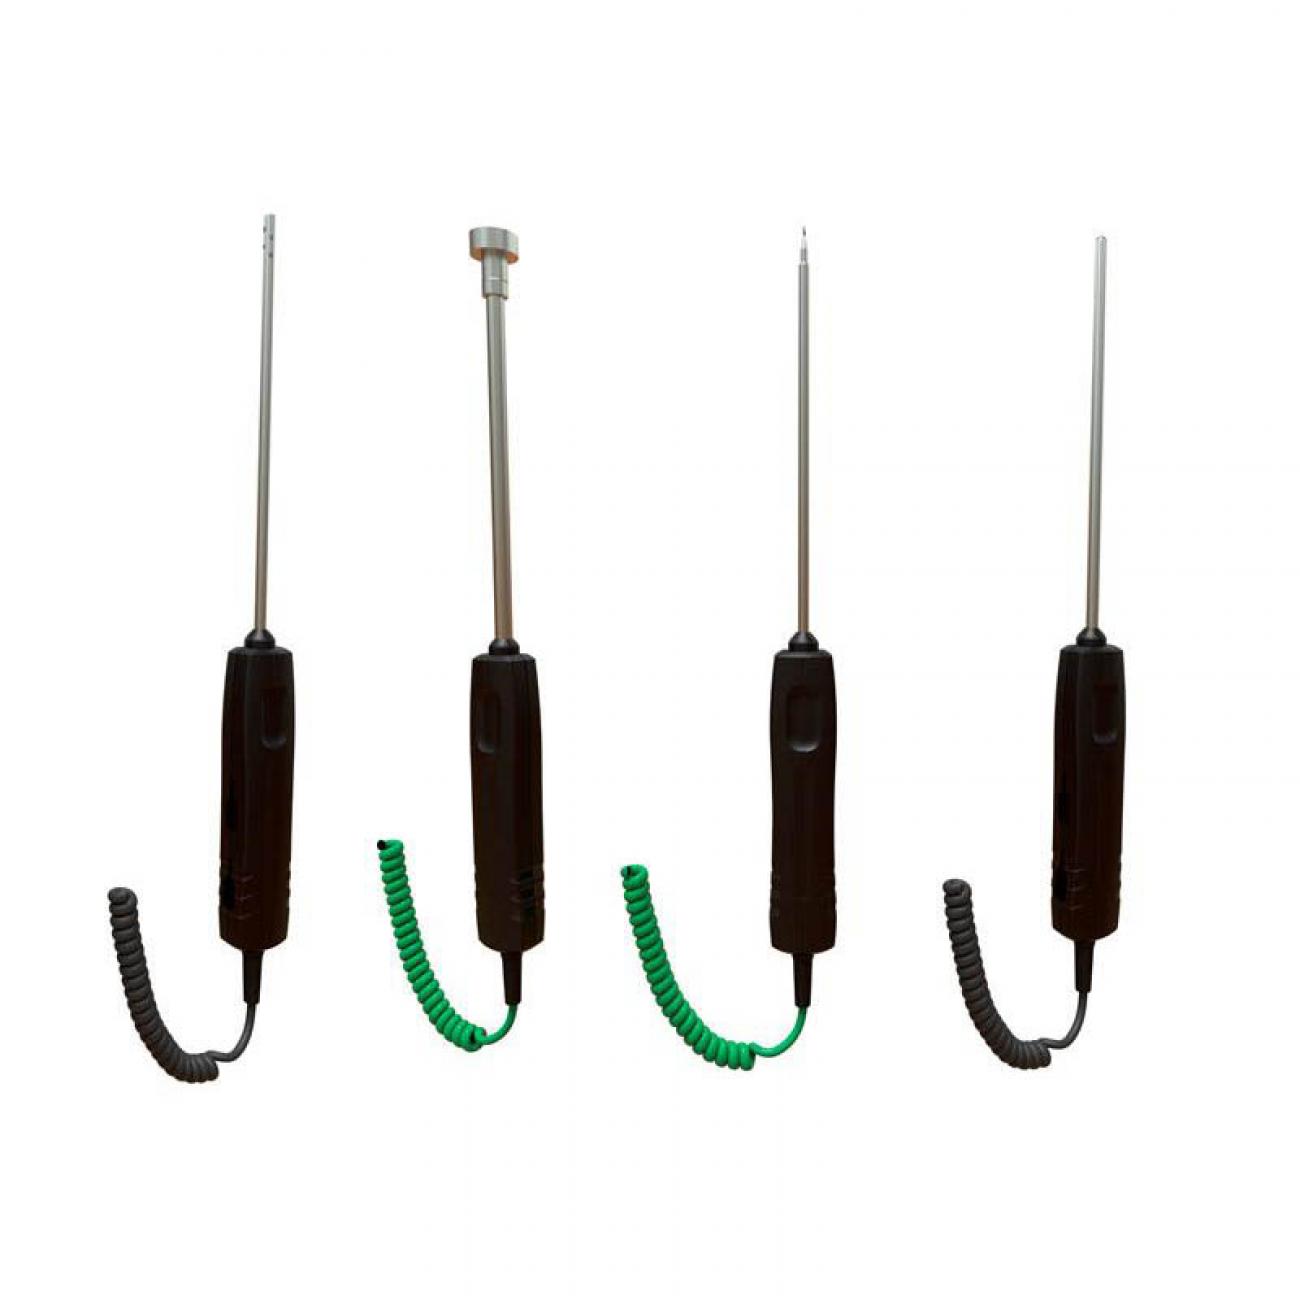 Thermocouple temperature probes For Data Loggers